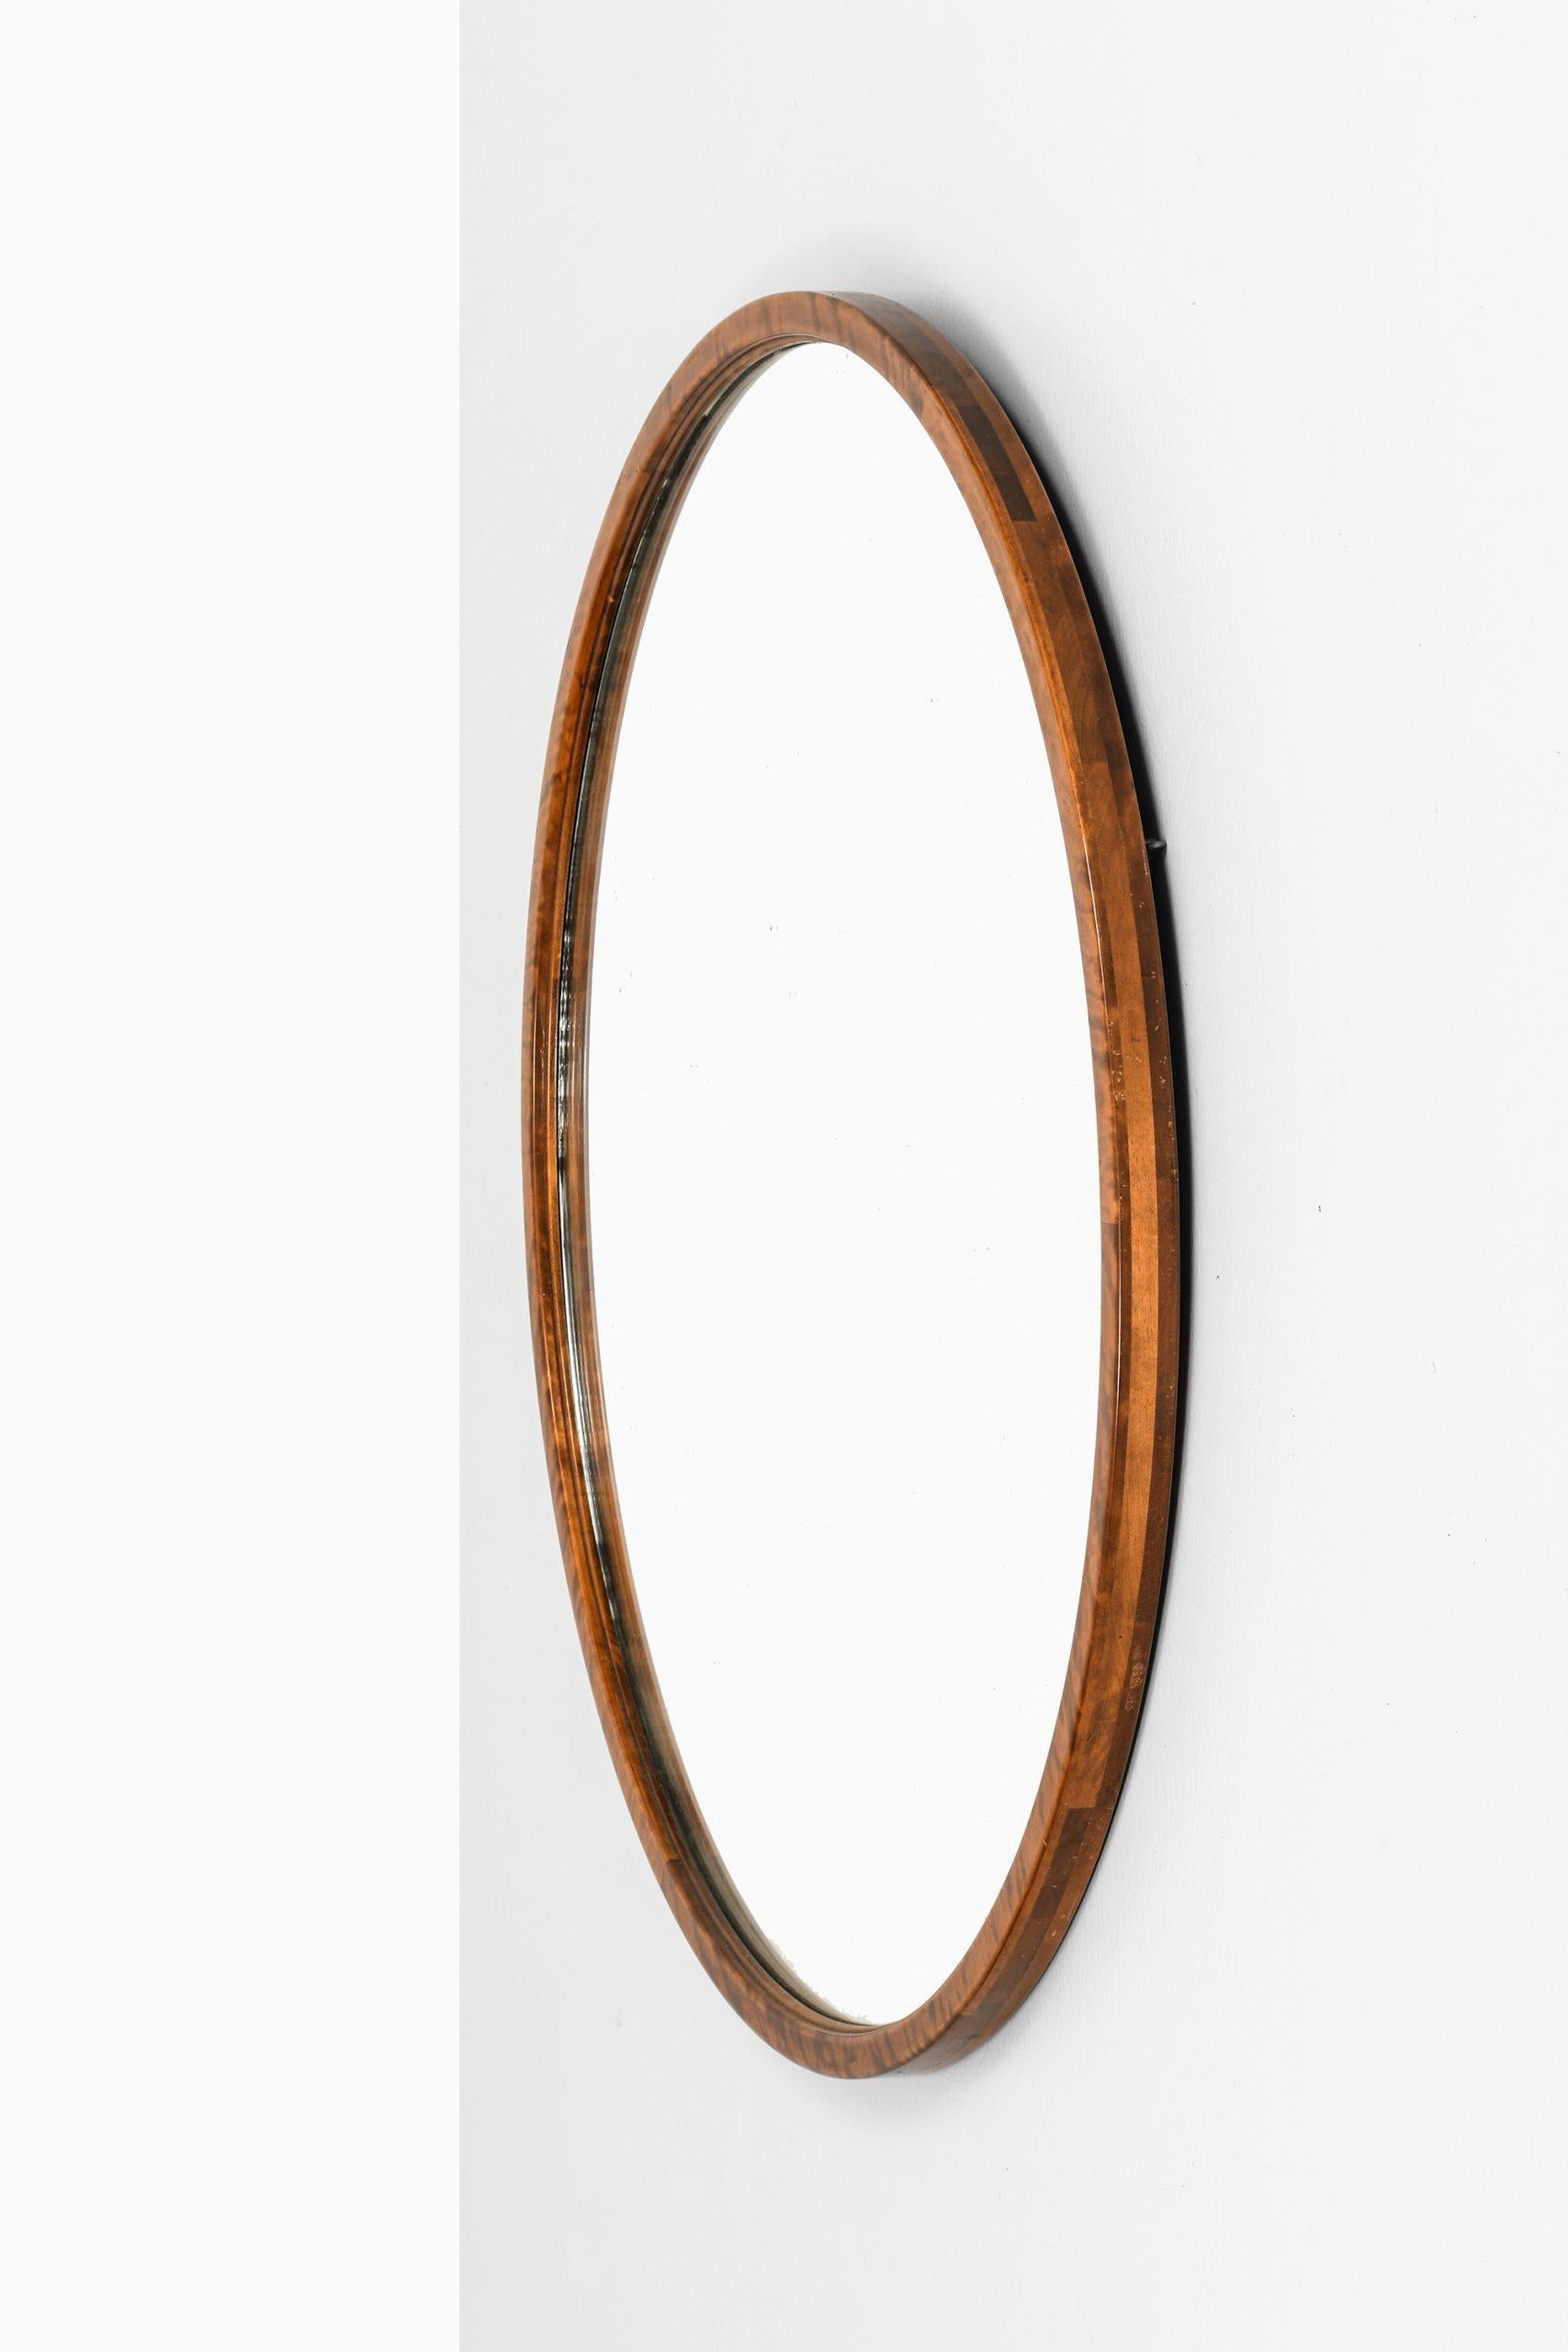 Swedish Mirror Attributed to Axel Einar Hjorth Produced by Bodabors in Sweden